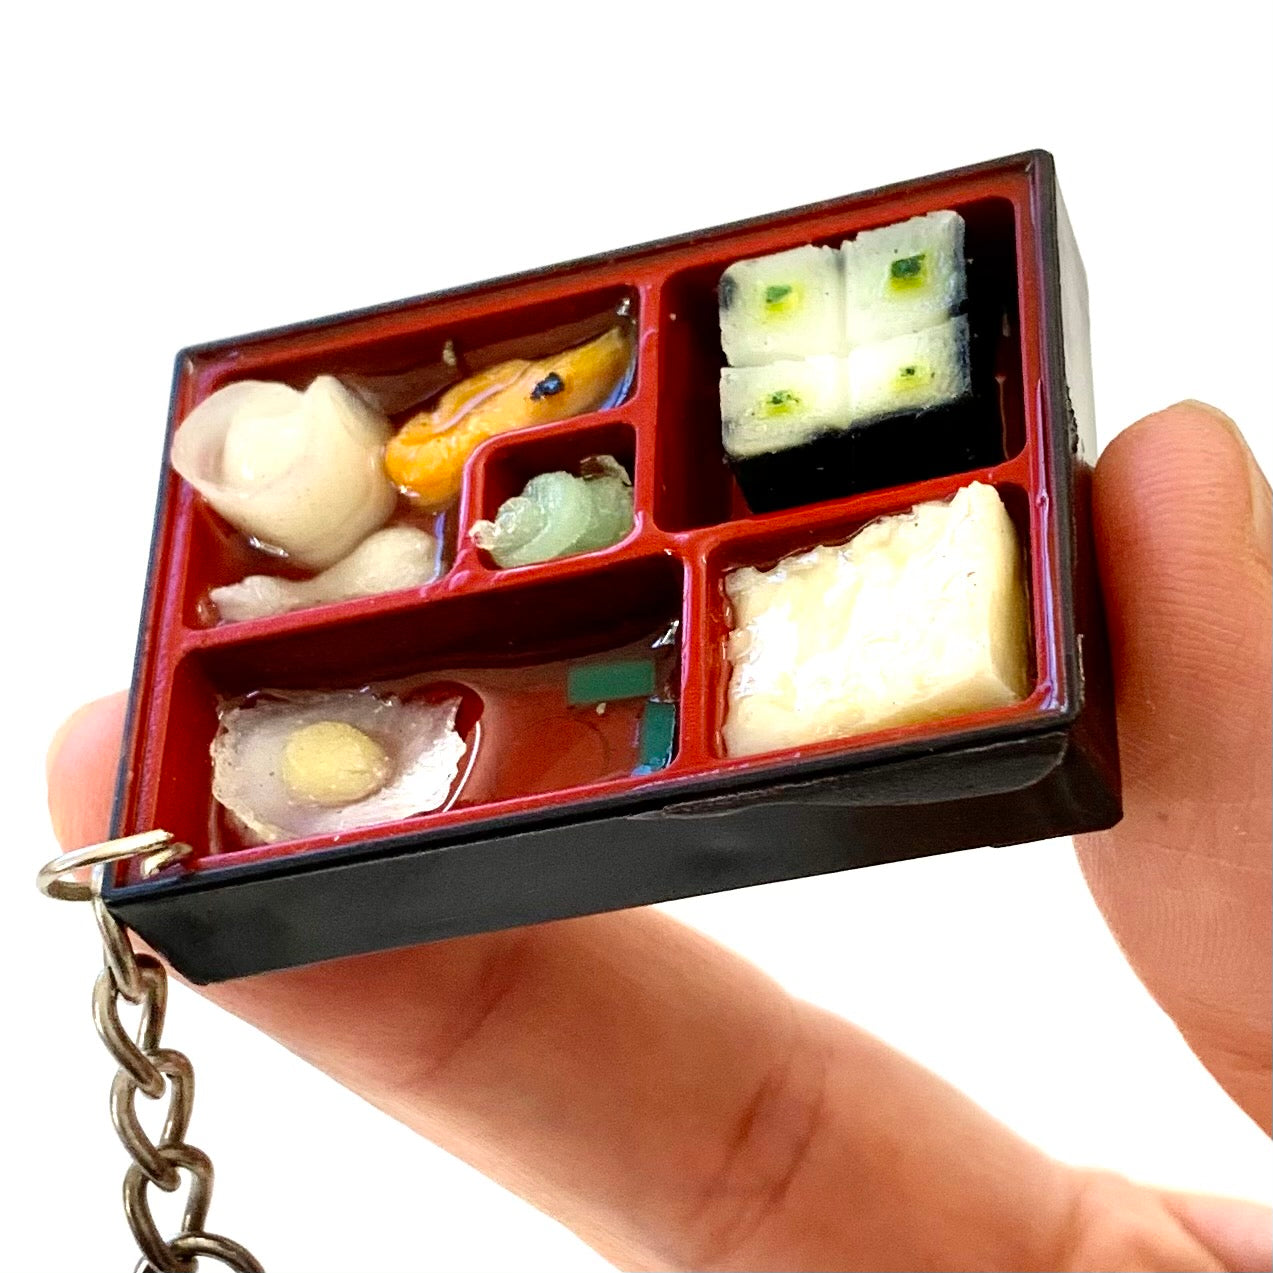 X 83031 BENTO LUNCH BOX KEYRING-DISCONTINUED